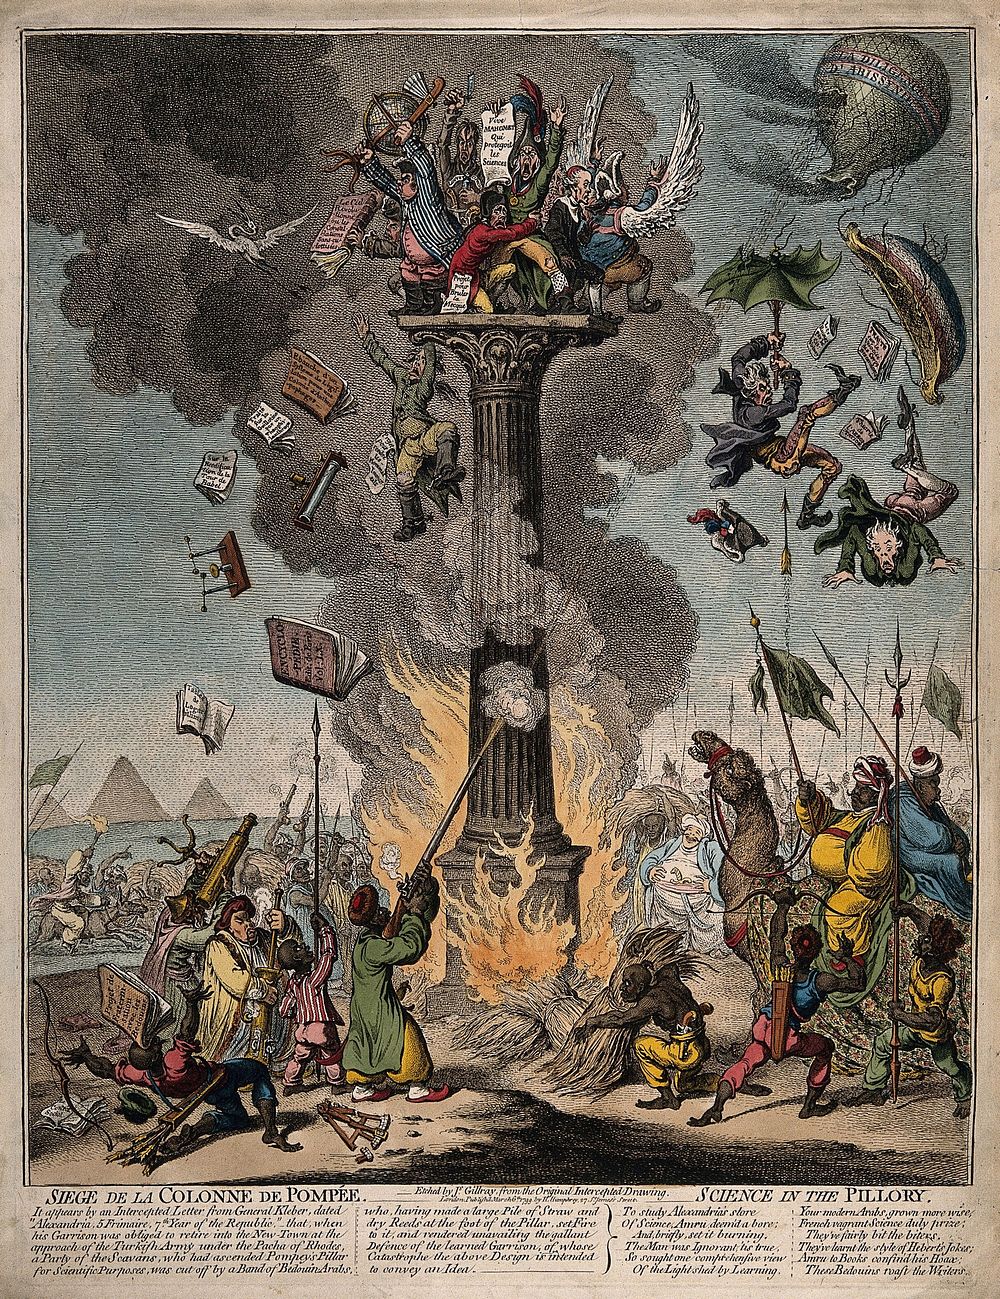 French savants huddled together at the top of a column, while a band of Bedouin Arabs set fire to it below; exaggerating the…